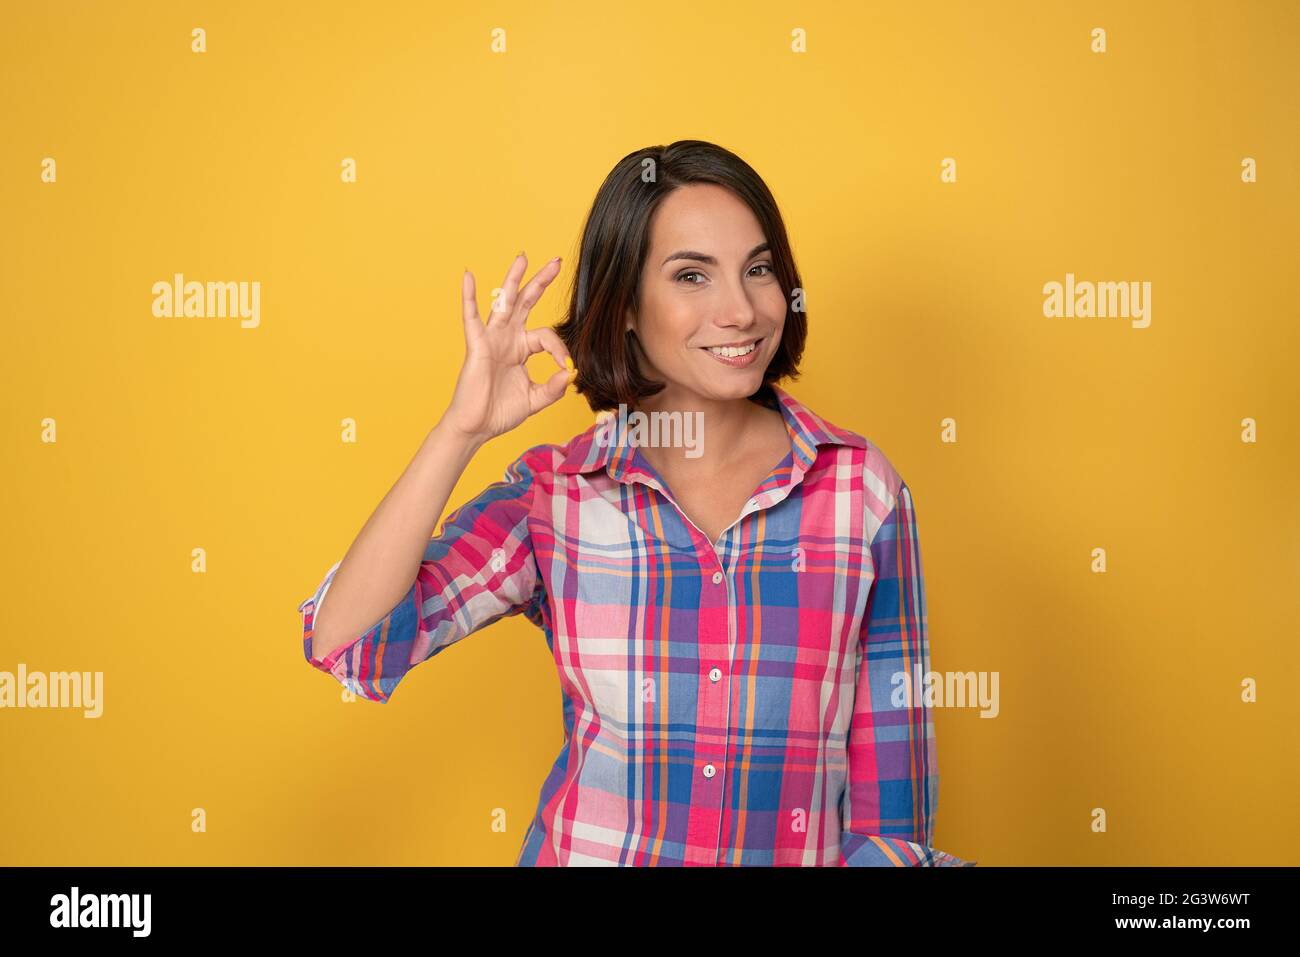 Happy girl showing OK gesture with one raised hand smile beautiful woman dressed in a plaid shirt and dark hair on yellow backgr Stock Photo